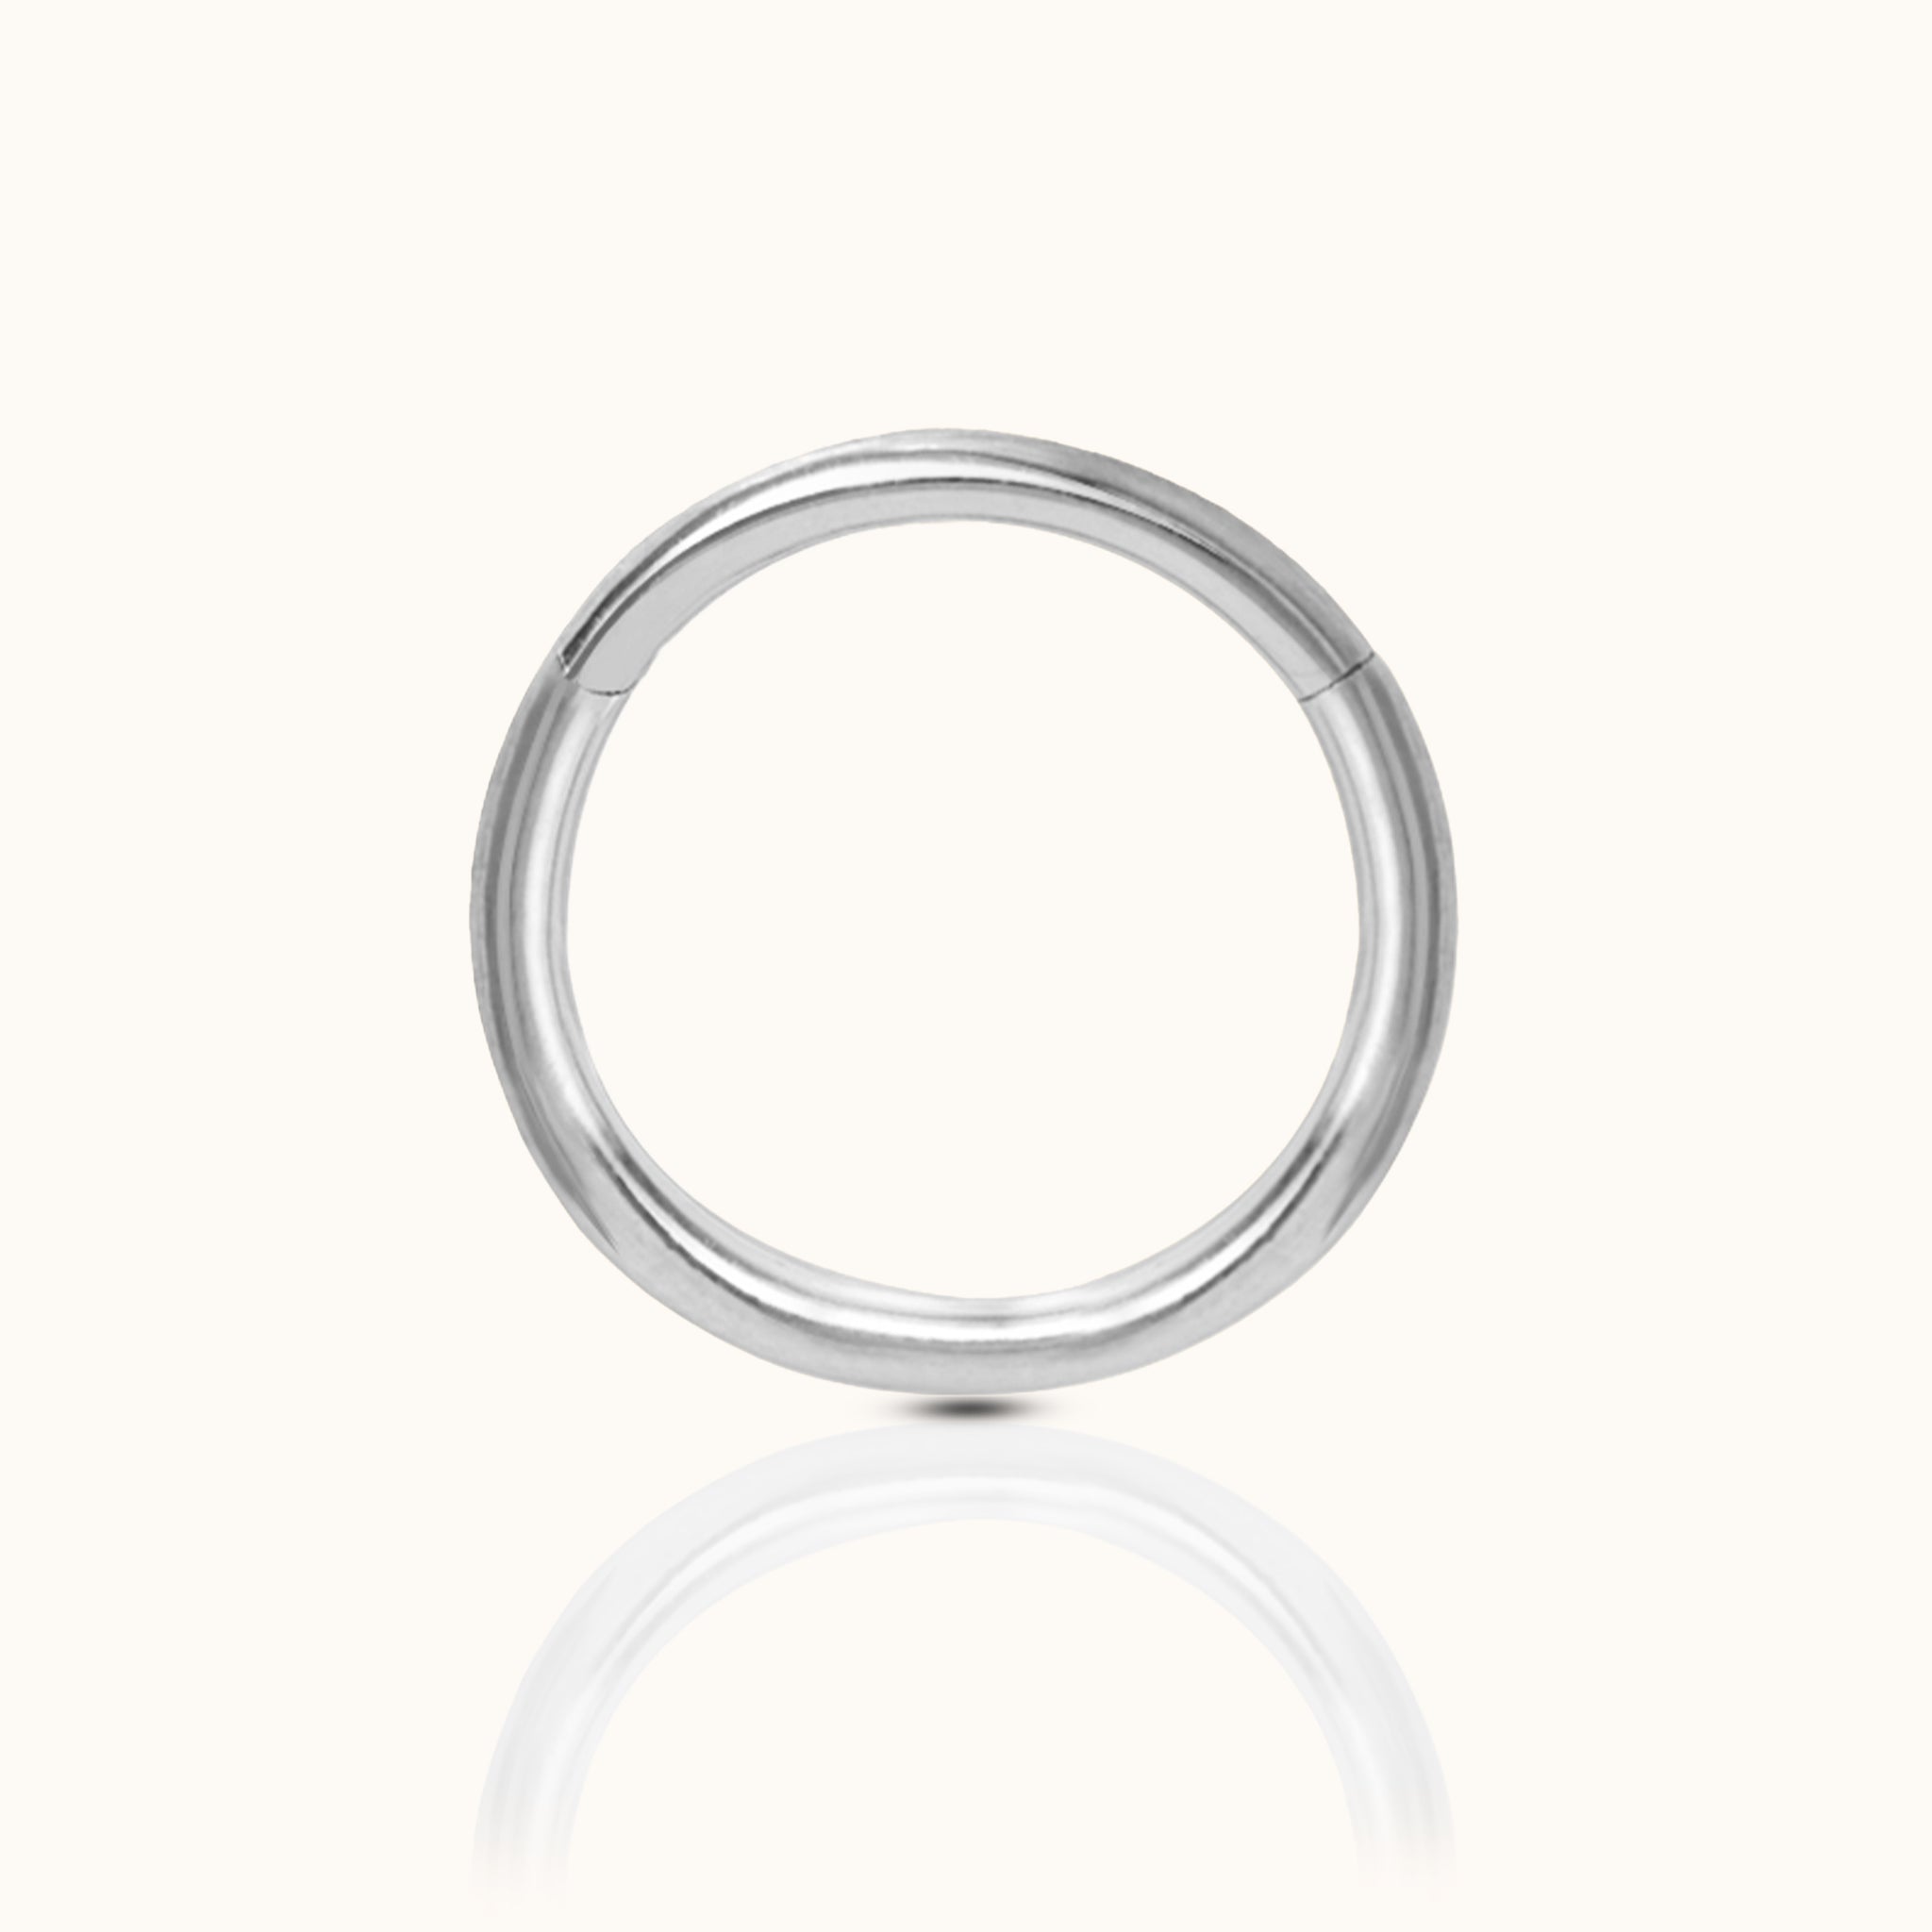 Classic Clicker 10mm Titanium Hinged Nap Hoop Earring by Doviana